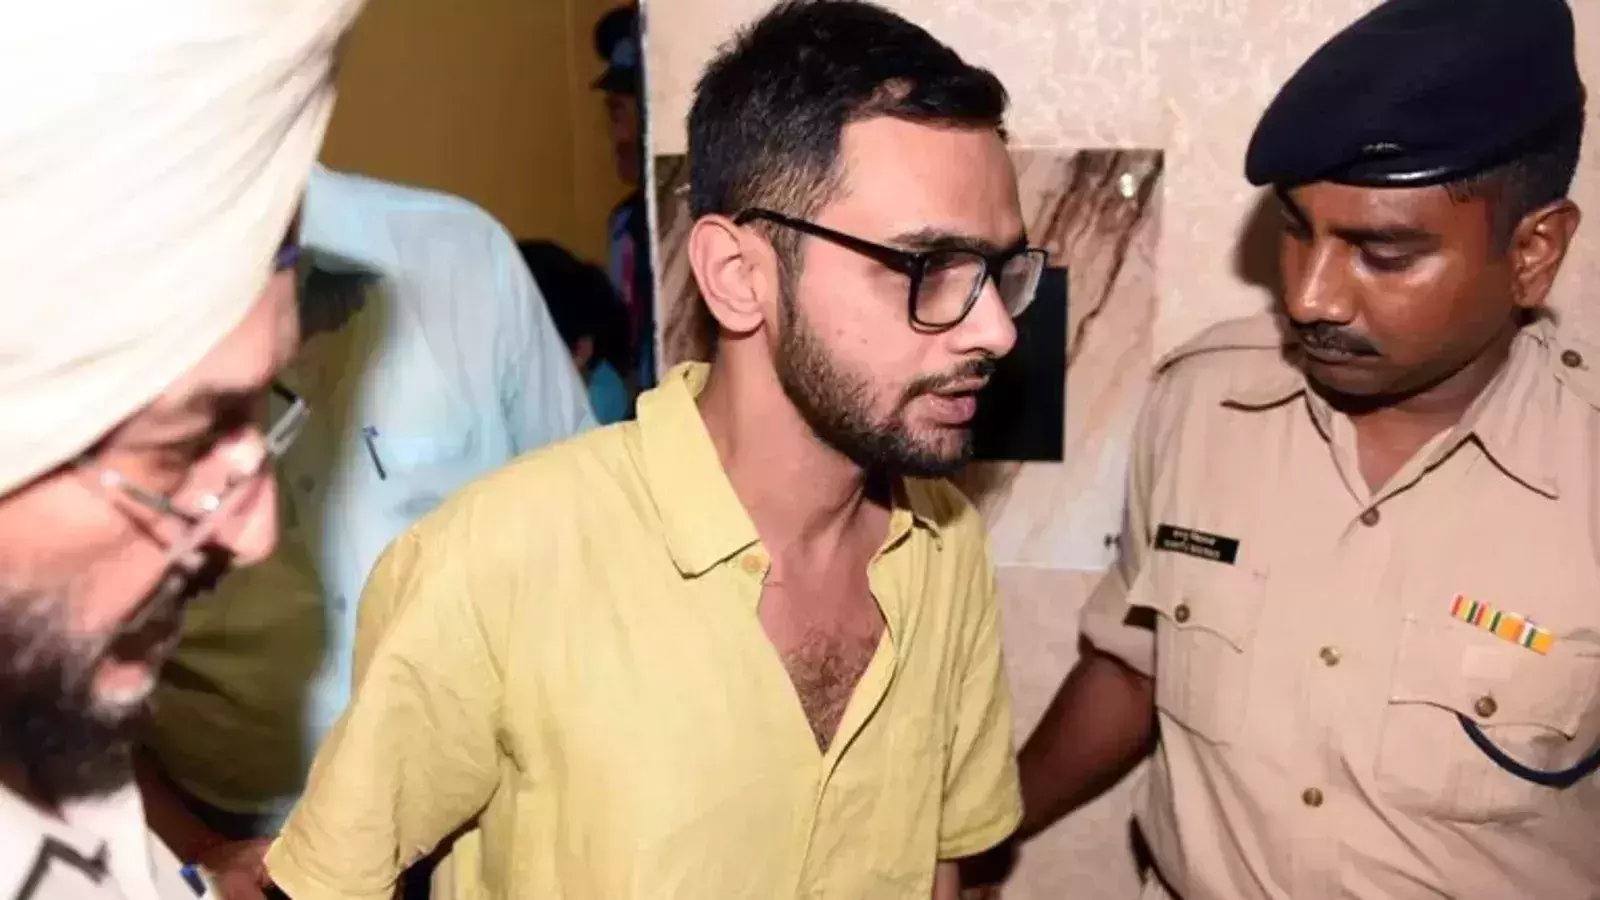 Delhi court asks Umar Khalid to stay away from media during interim bail